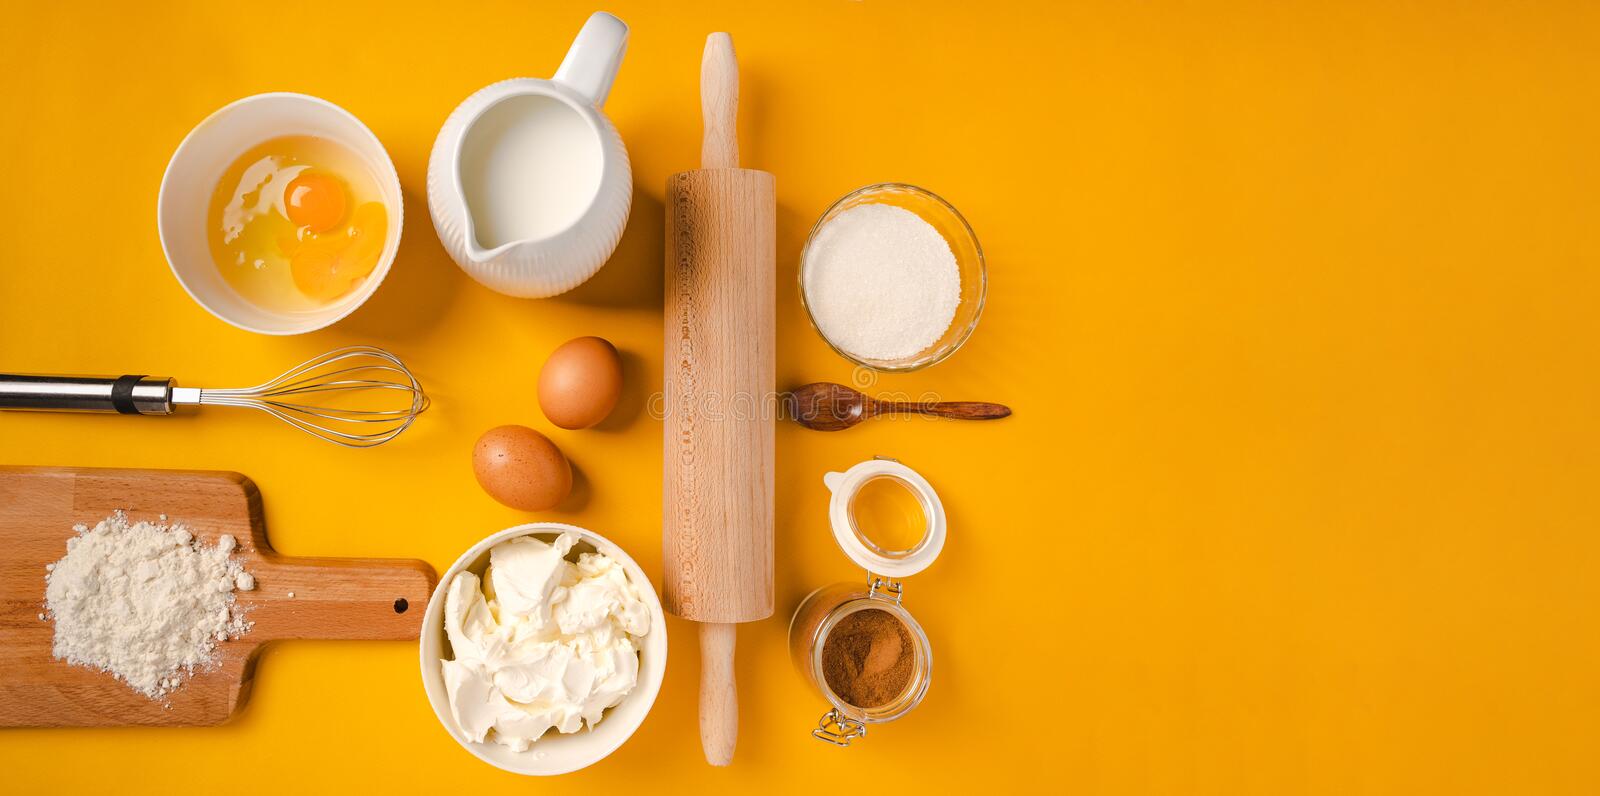 https://www.bakingclassinchennai.com/blog/wp-content/uploads/2021/05/ingredients-baking-tools-yellow-background-top-view-cooking-concept-banner-copy-space-text-204363029.jpg